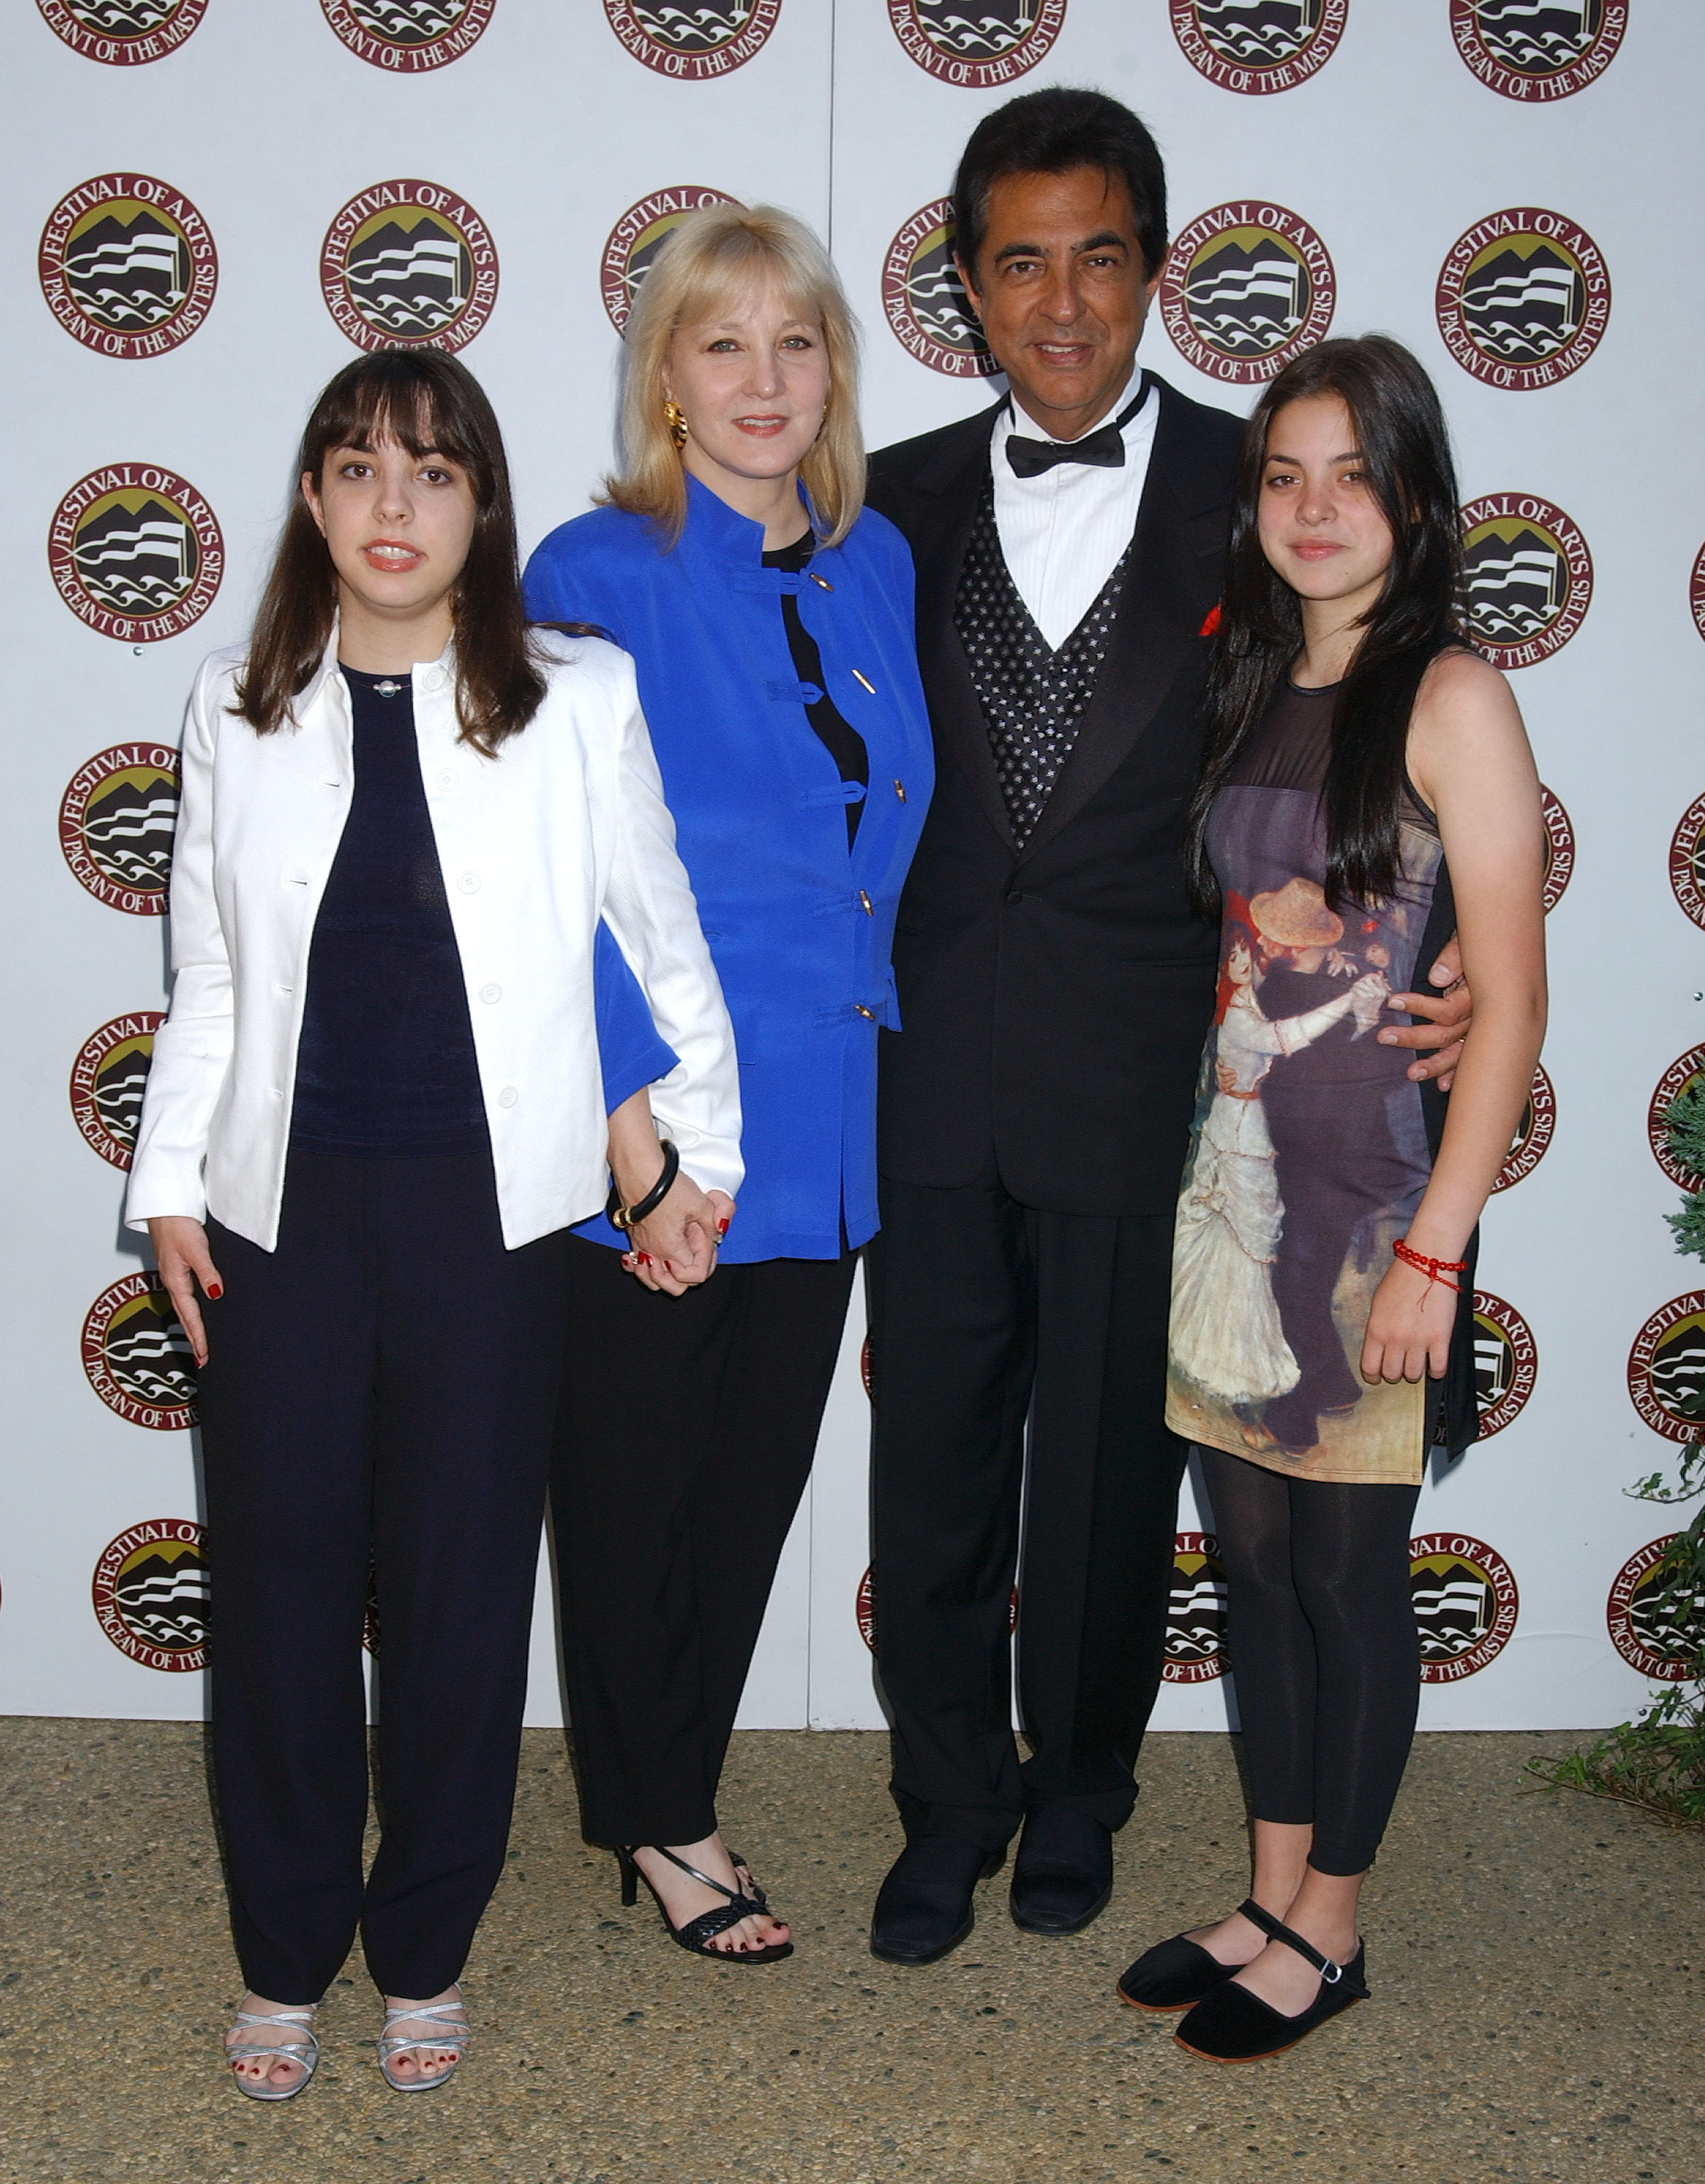 Mia Mantegna, Arlene Vhrel, Joe Mantegna, and Gia Mantegna at the 6th Annual Pageant of the Masters Gala Benefit in 2004 | Source: Getty Images